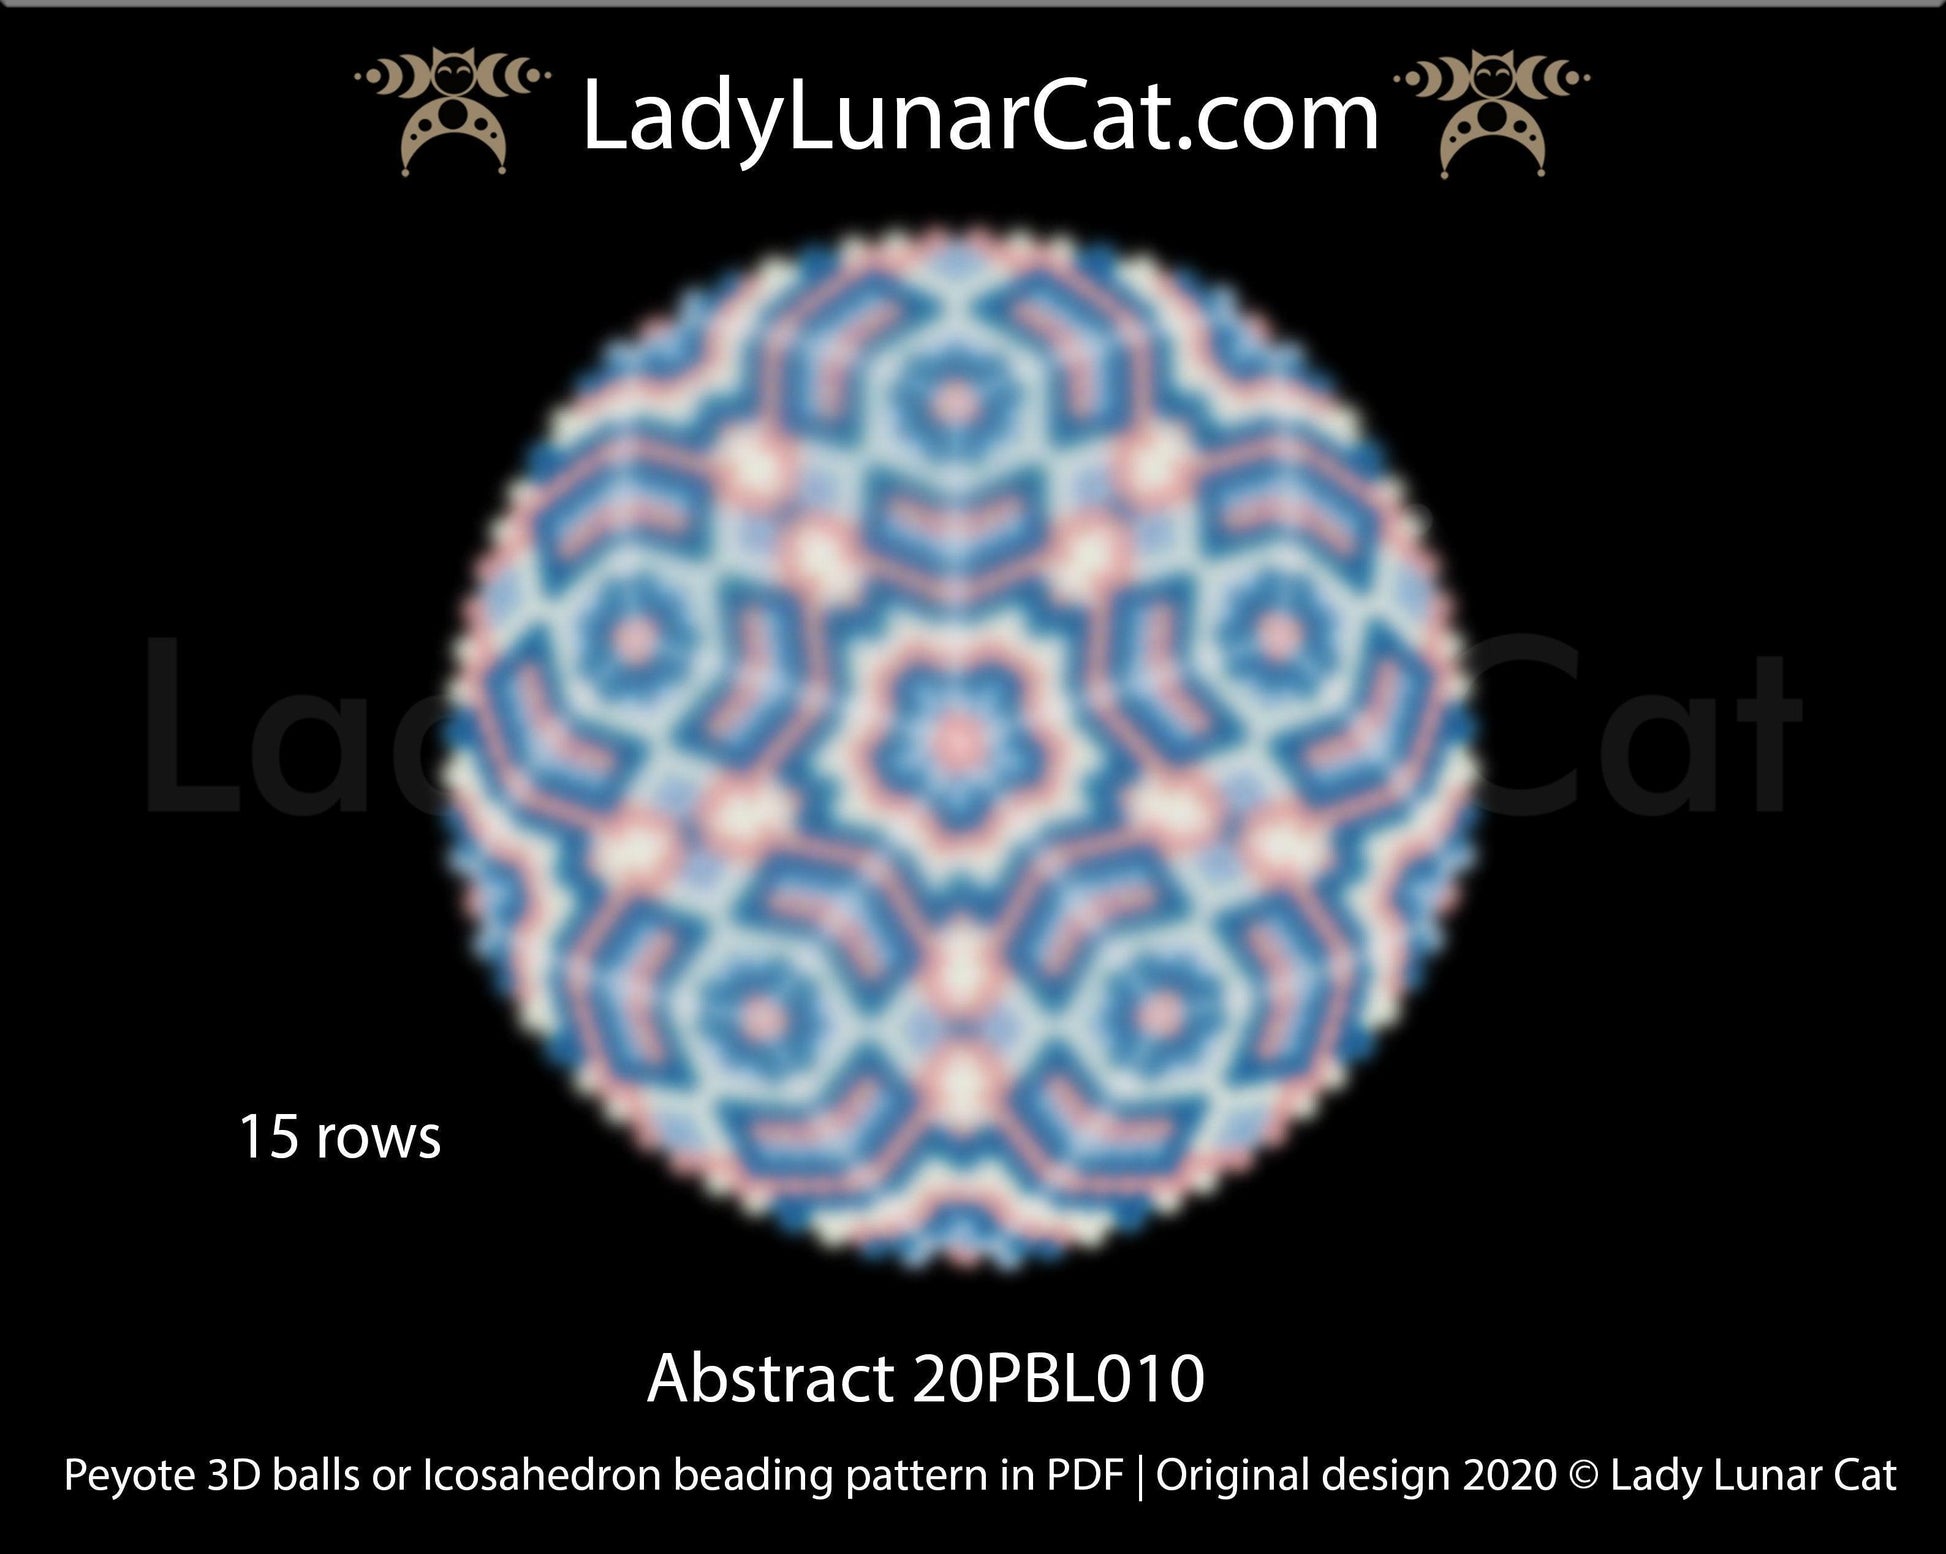 Peyote 3d ball pattern for beading | Beaded Icosahedron Abstract 20PBL010 15 rows LadyLunarCat